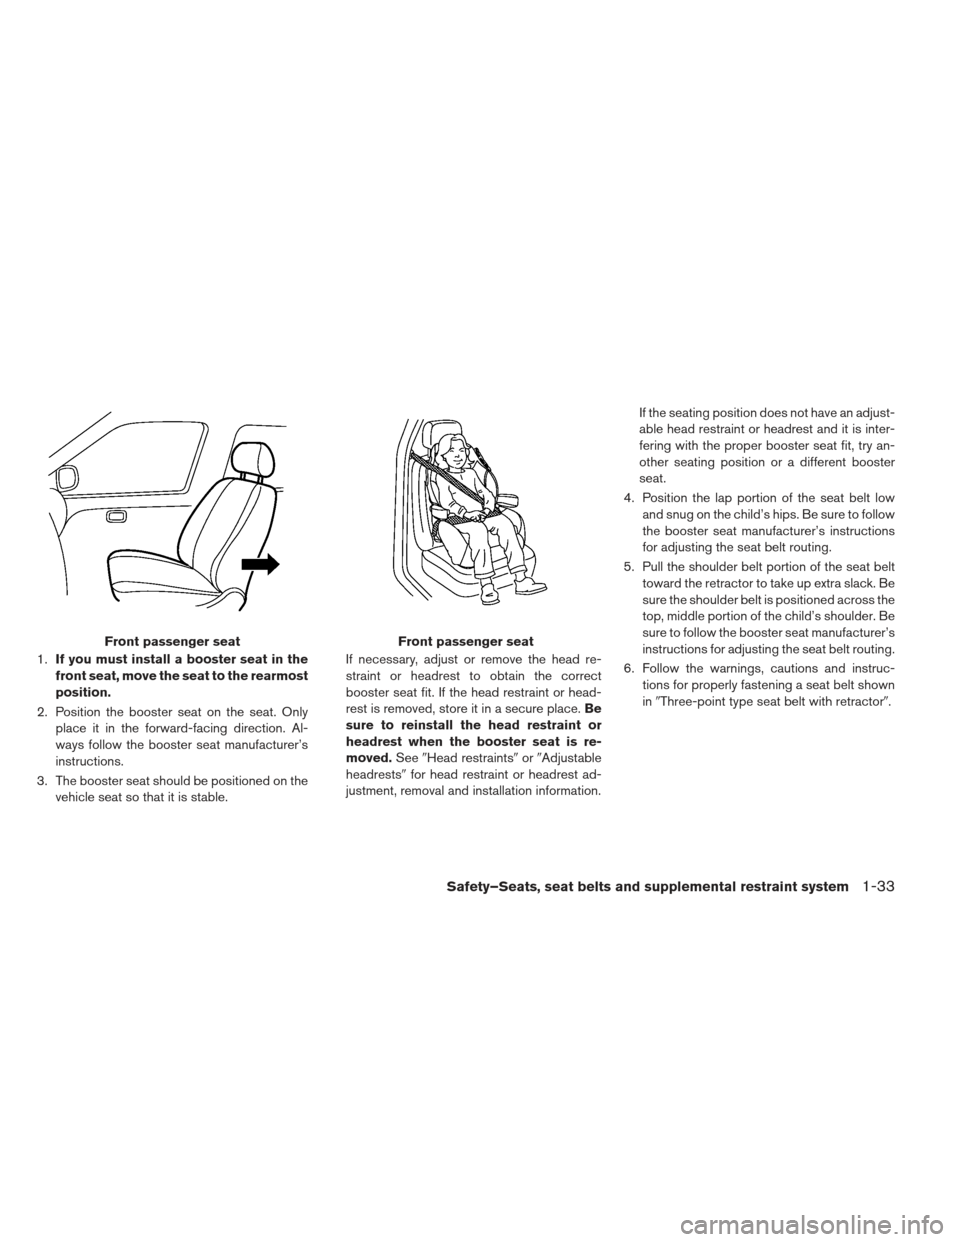 NISSAN LEAF 2013 1.G Service Manual 1.If you must install a booster seat in the
front seat, move the seat to the rearmost
position.
2. Position the booster seat on the seat. Only place it in the forward-facing direction. Al-
ways follow